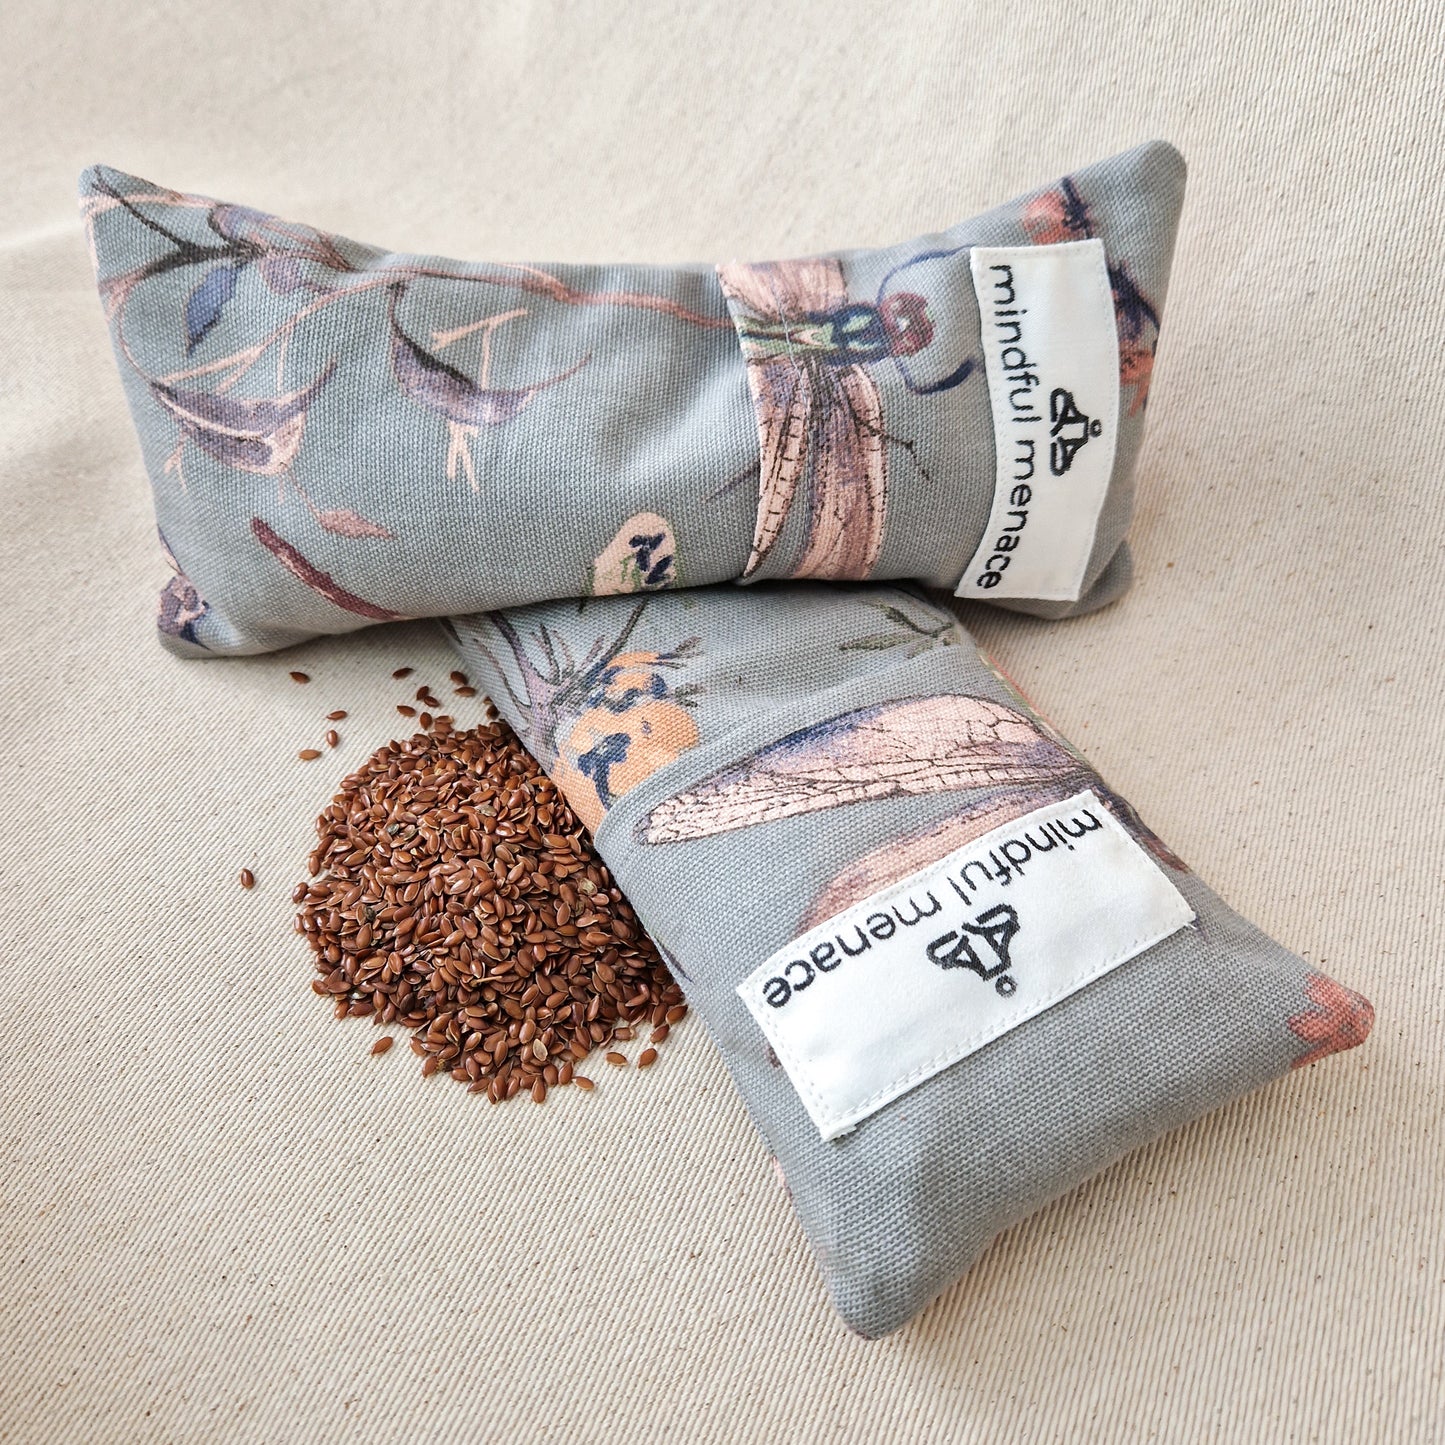 Flaxseed yoga eye pillow weighted